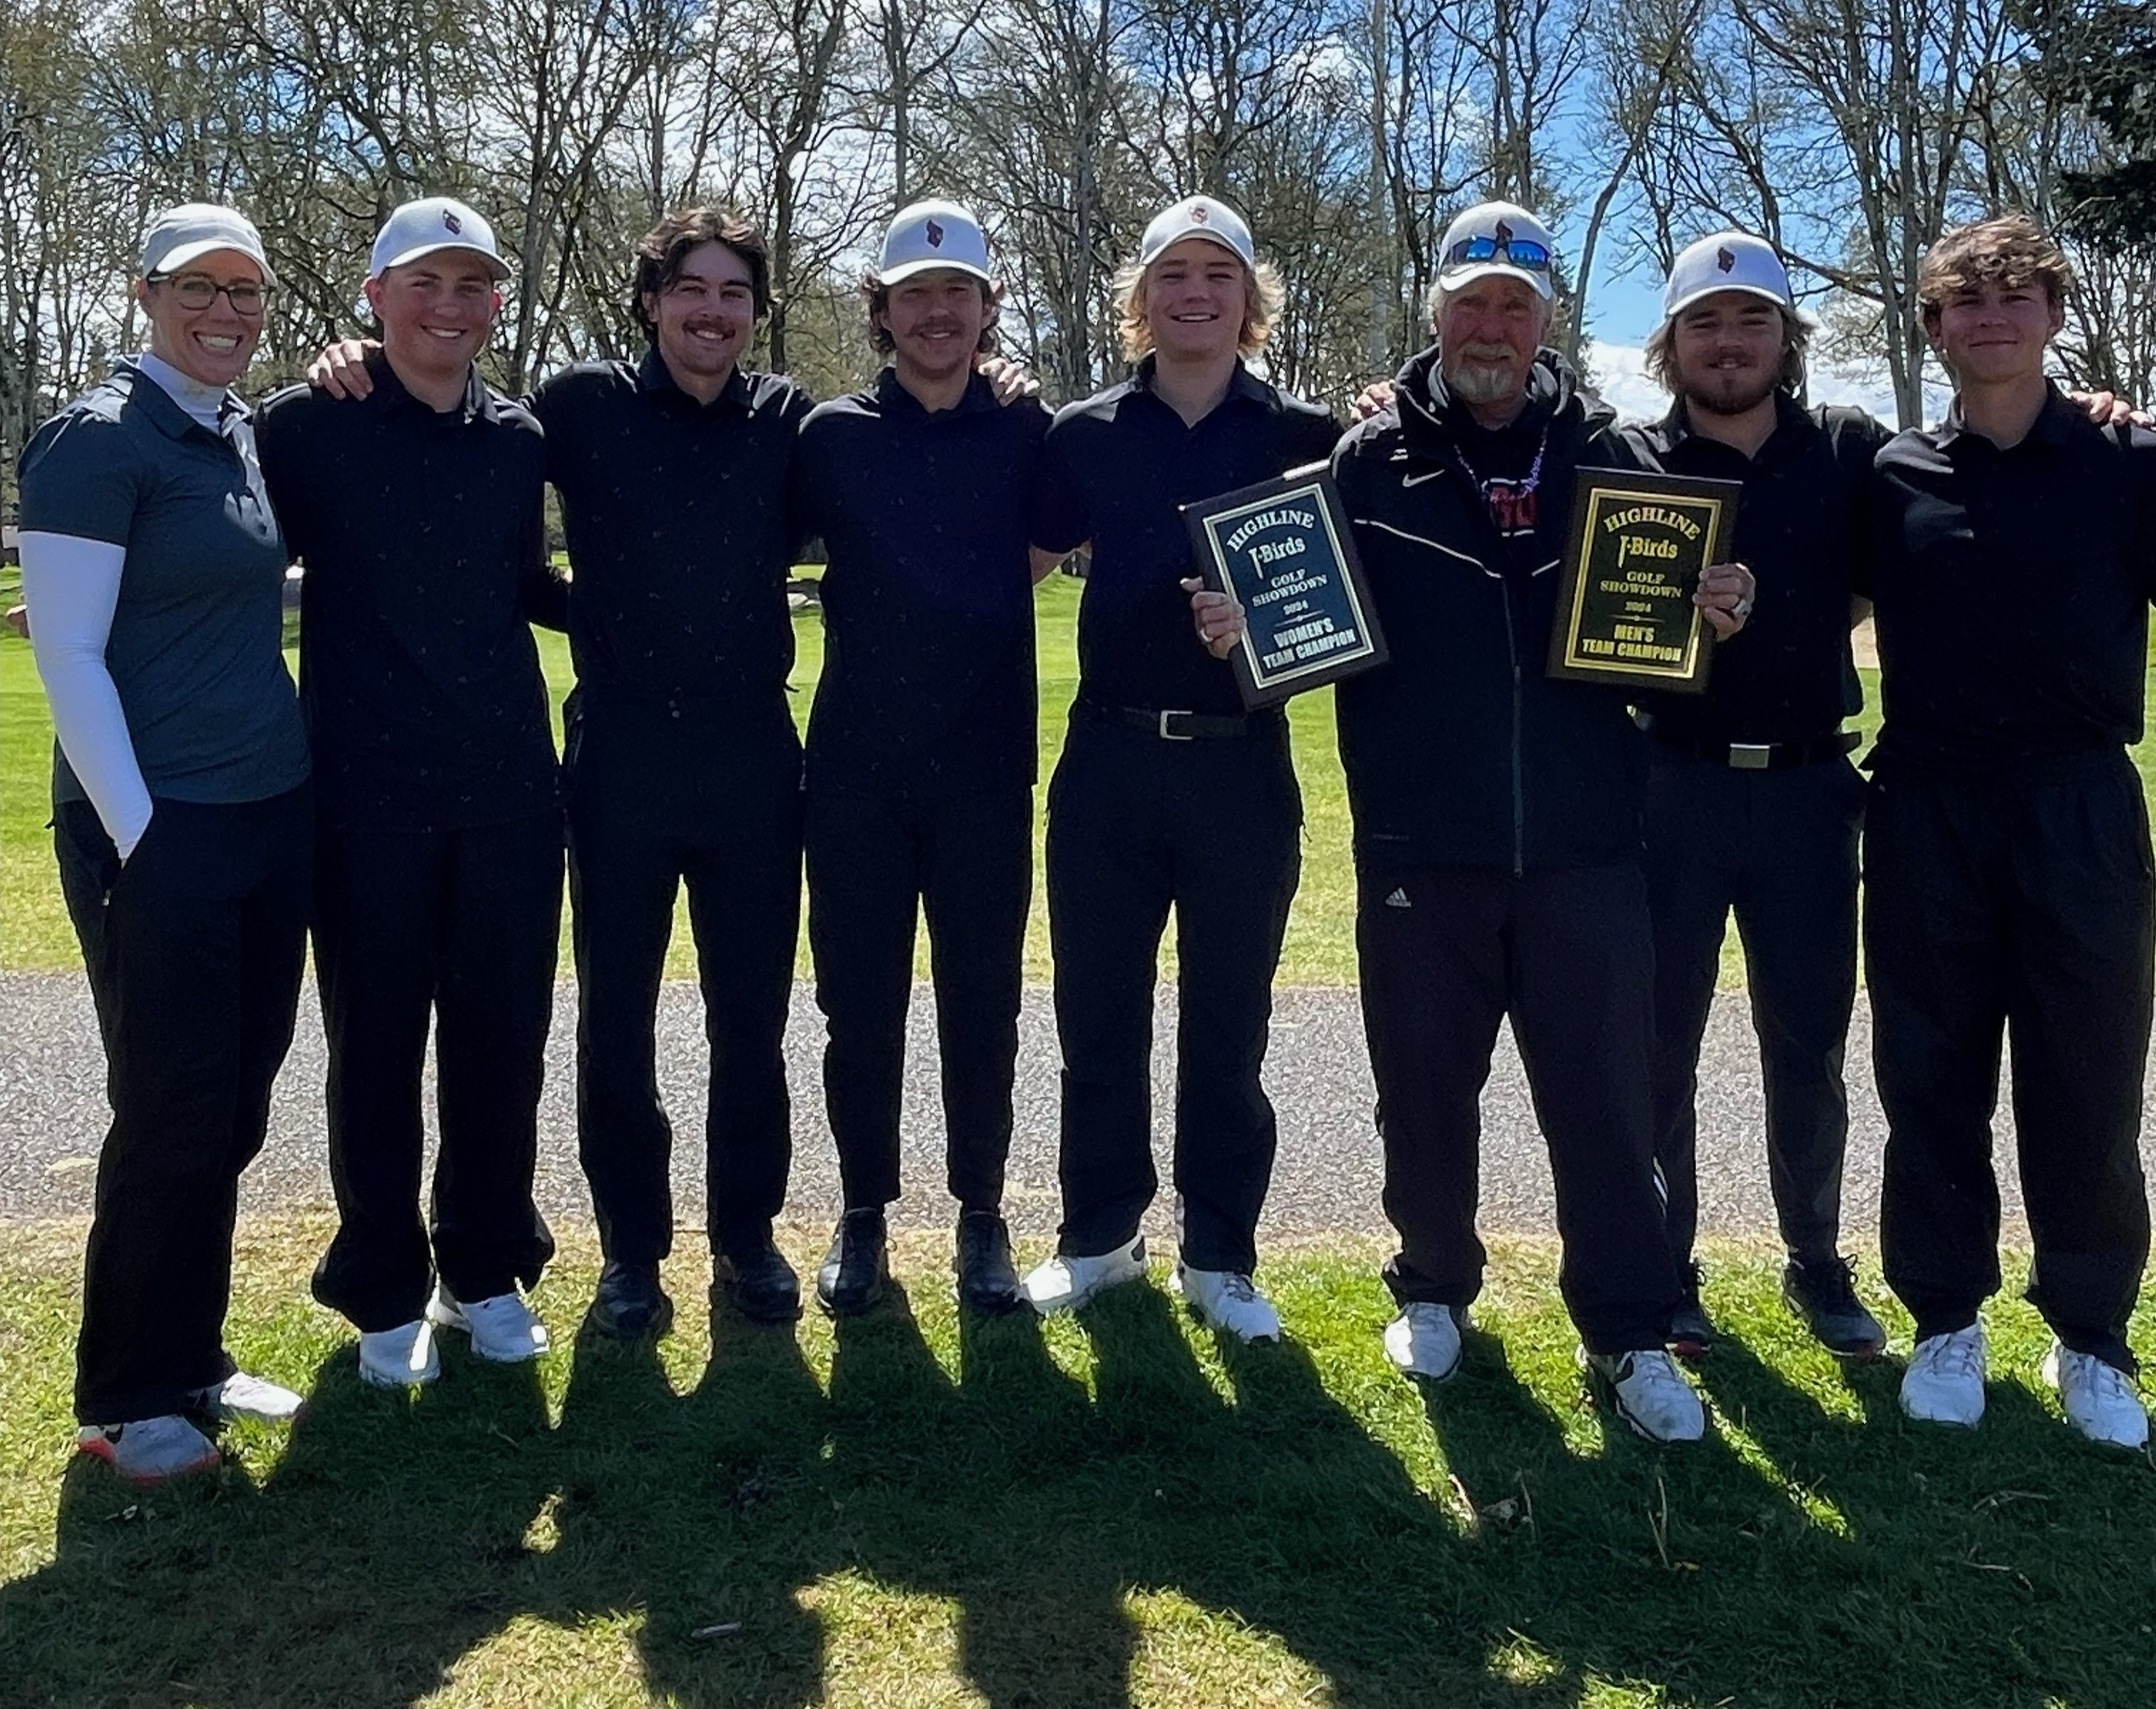 The North Idaho College men's golf team won a Northwest Athletic Conference tournament hosted by Highline Community College at Oakbrook Golf Course in Lakewood, Wash. From left are assistant coach Brittany Pounds, Dyson Lish, Josh McCartain, Jarett Giles, Ferdinand Le Grange, assistant coach Russ Grove, Charlie Terwilliger and Spence Matson.